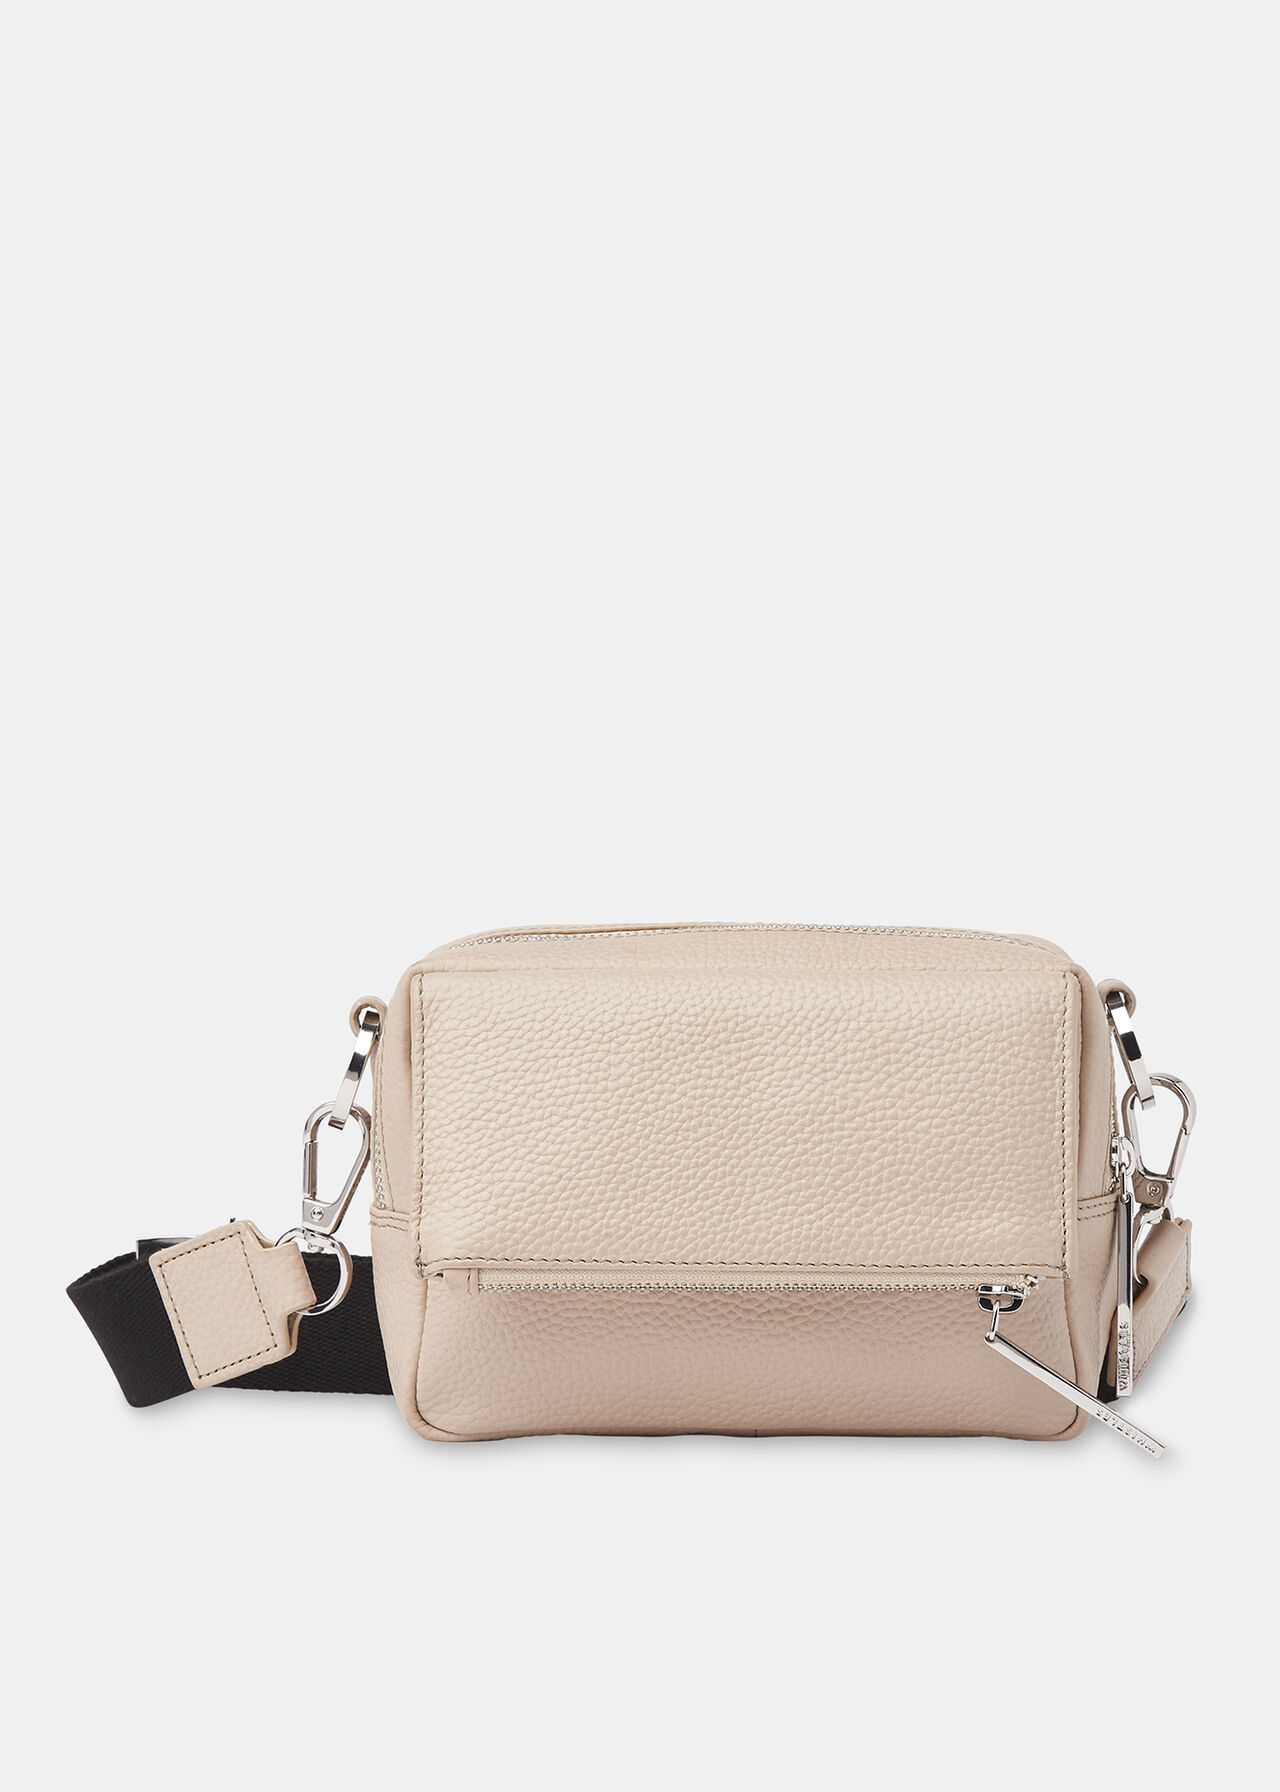 Bibi Taupe Leather Crossbody Bag With Strap | Whistles | Whistles UK